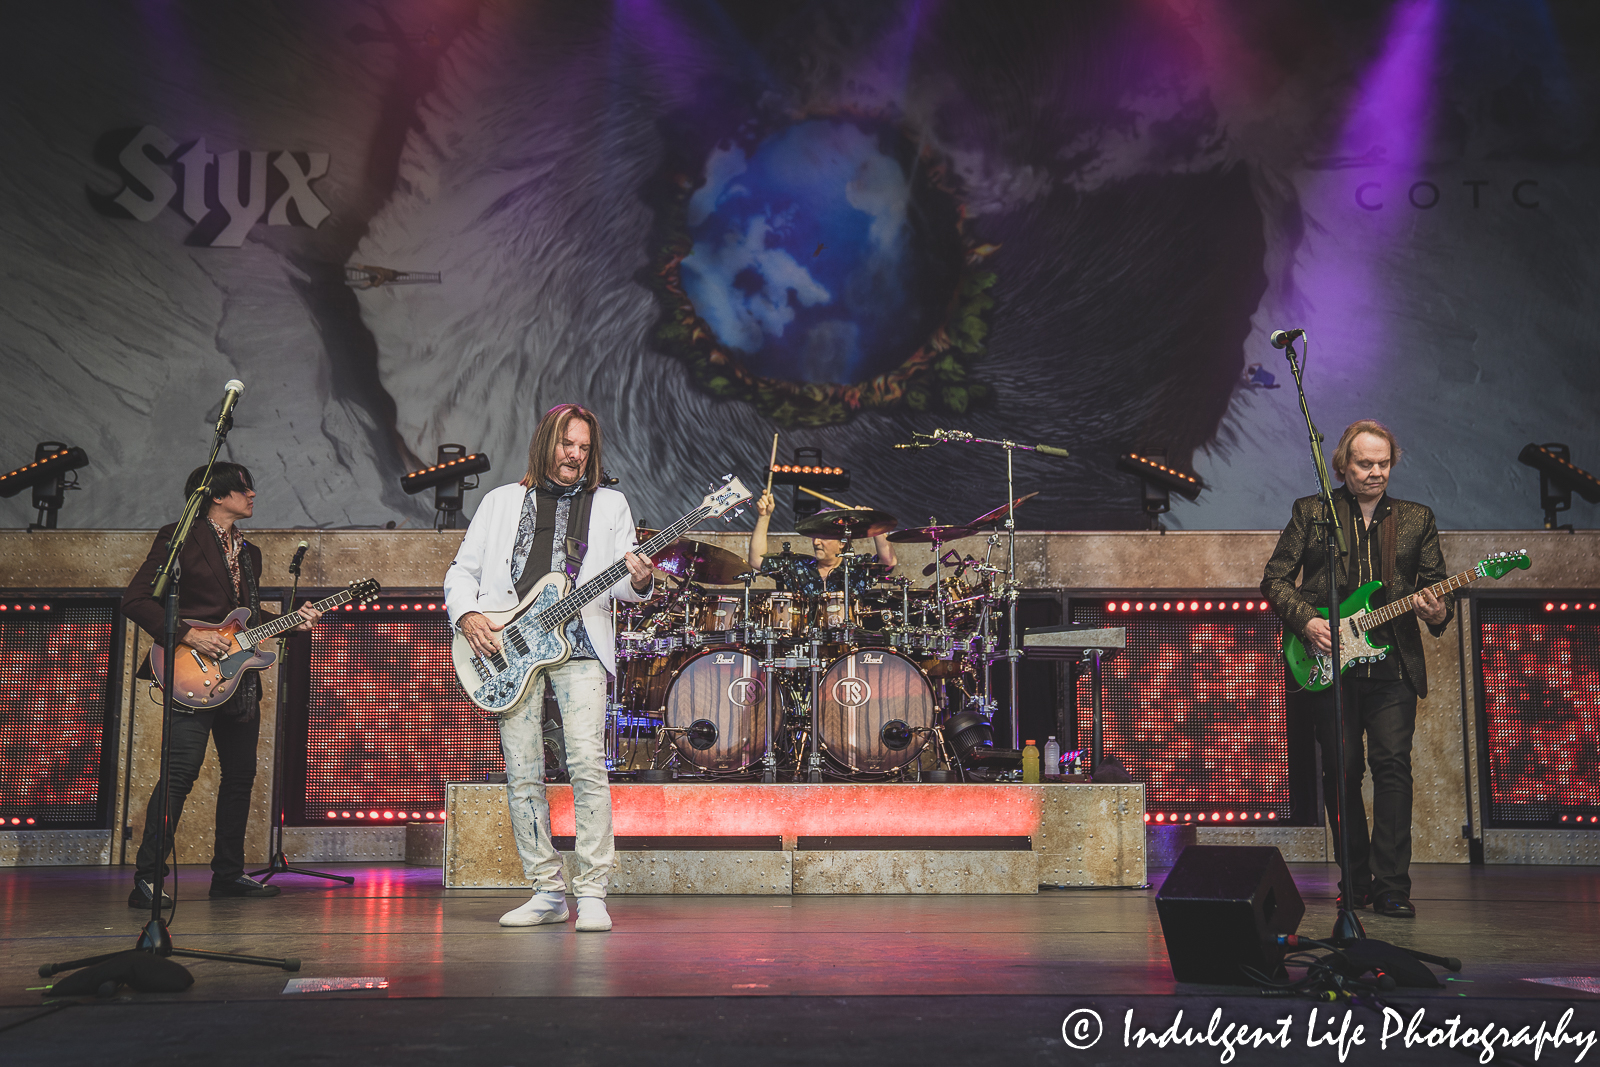 Styx band members Will Evankovich, Ricky Phillips, Todd Sucherman and James "J.Y." Young live in concert together at Starlight Theatre in Kansas City, MO on June 14, 2022.